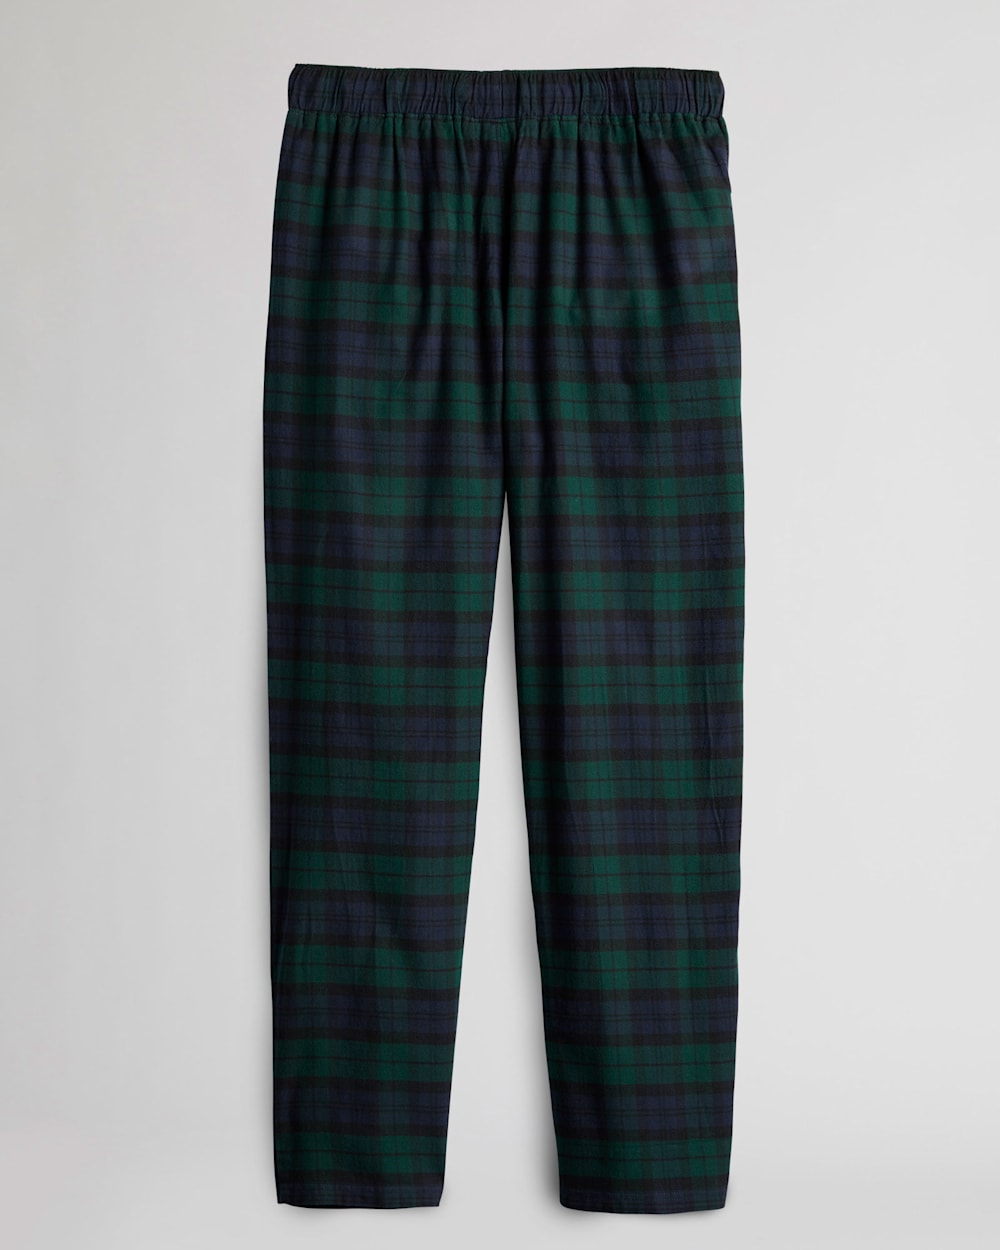 ALTERNATE VIEW OF MEN'S FLANNEL PAJAMA PANTS IN GREEN/BLUE PLAID image number 1